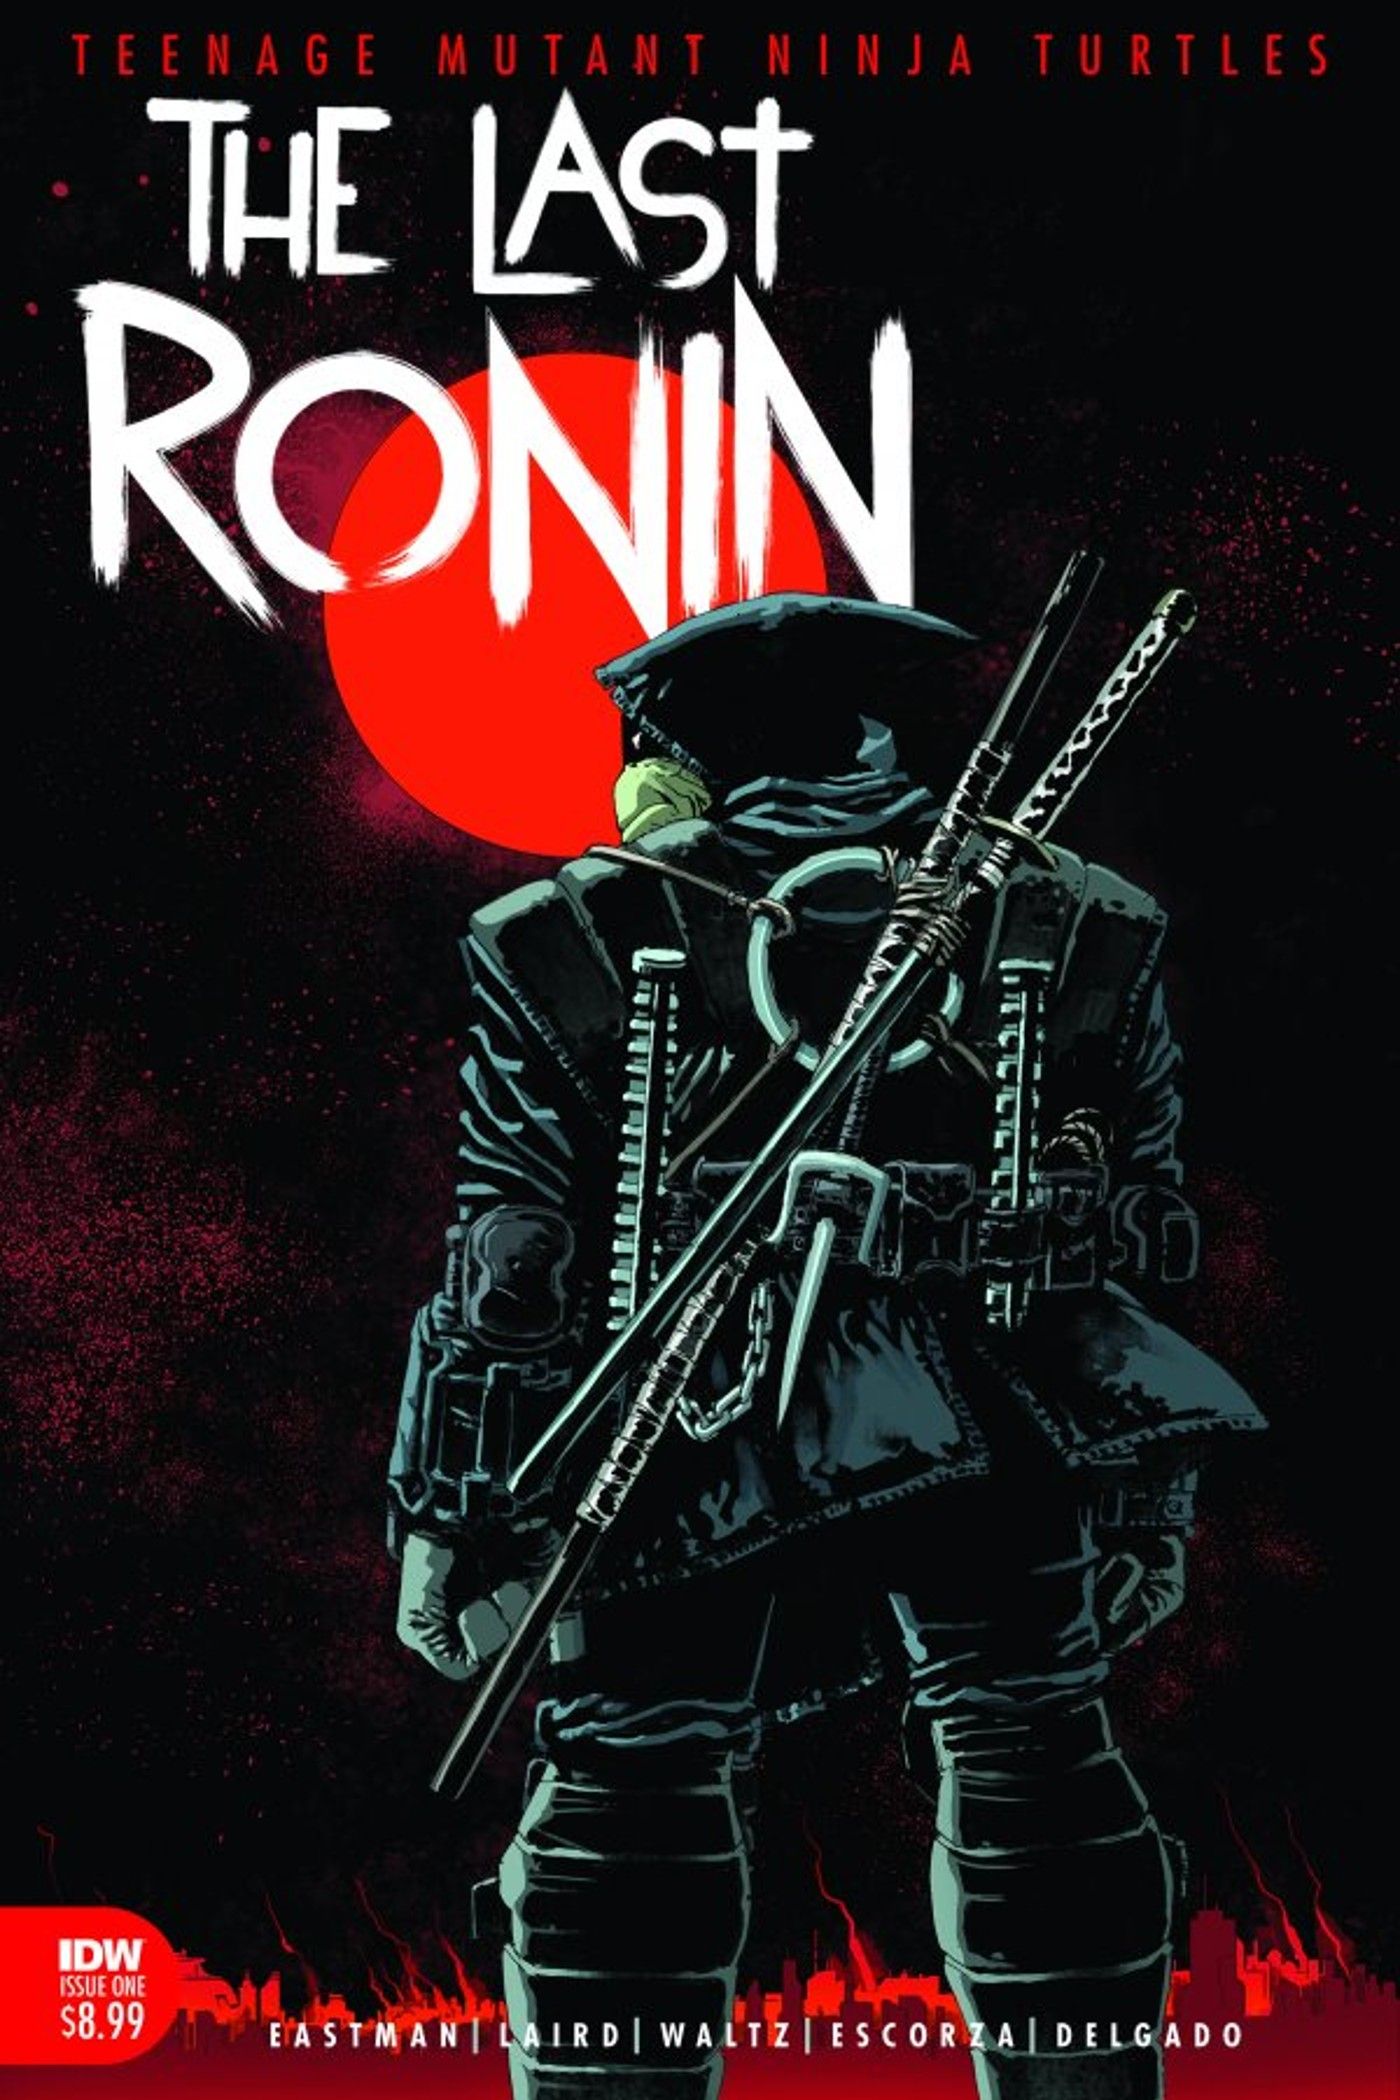 Lone ninja turtle stands on the cover of TMNT: The Last Ronin